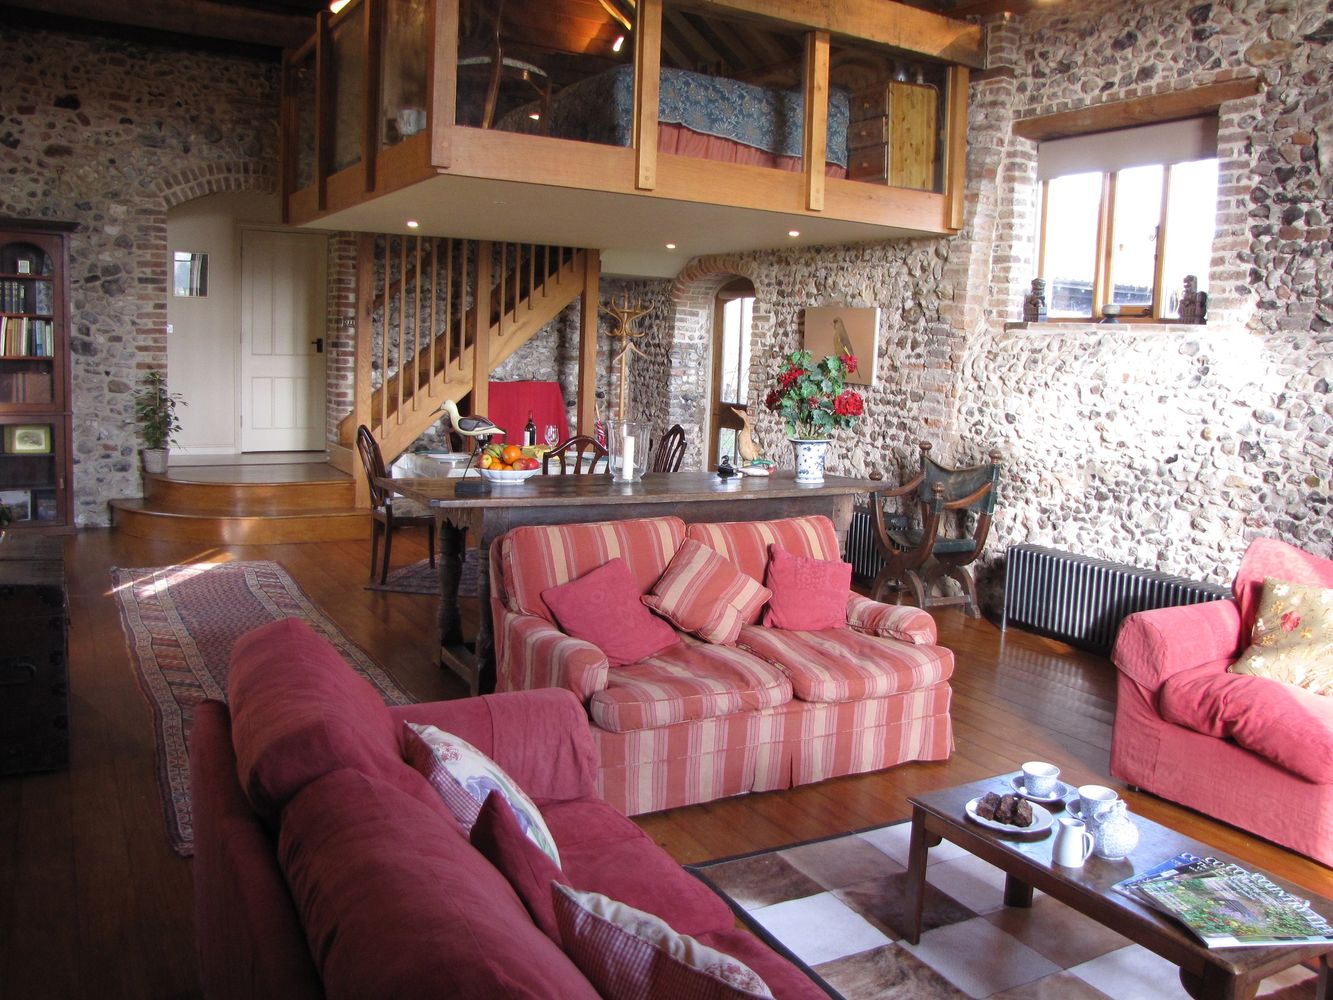 Relax in a converted self-catering barn